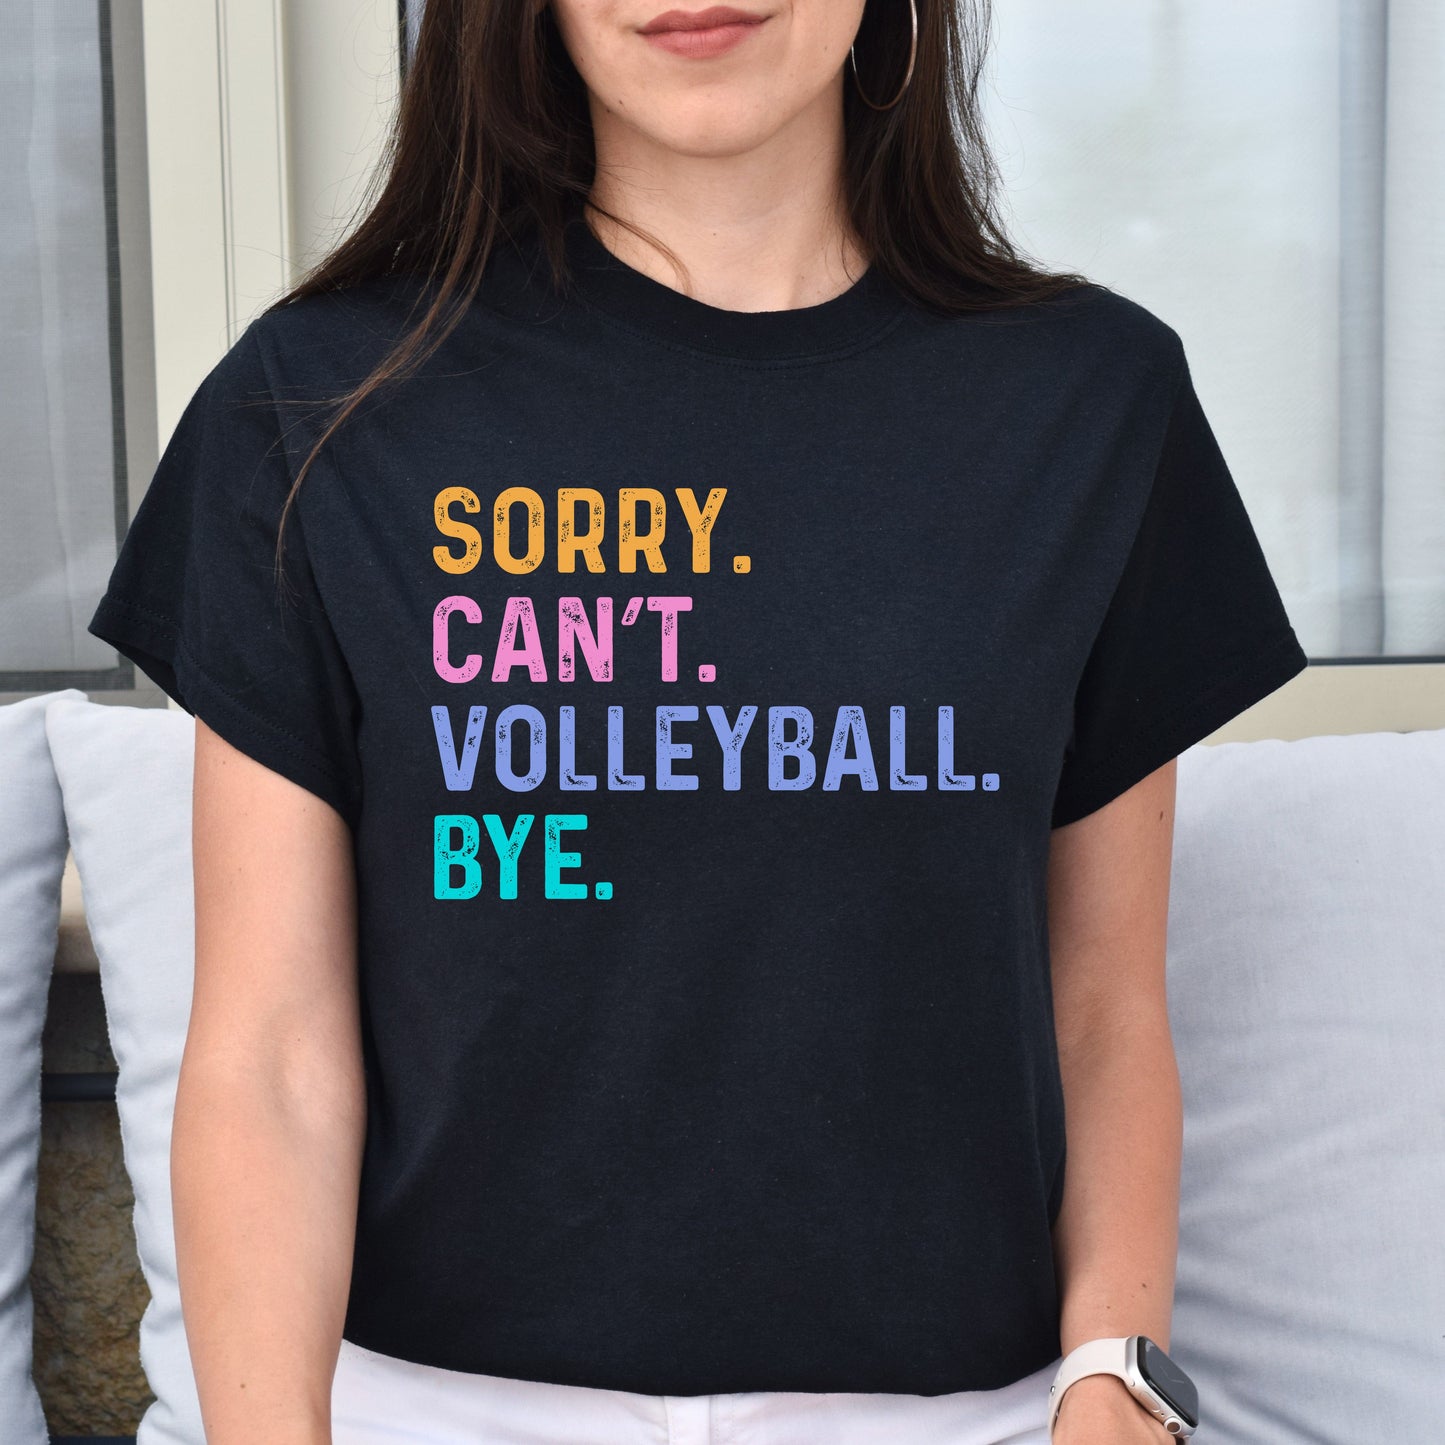 Volleyball fan Unisex t-shirt Sorry Can't Volleyball Bye tee black dark heather-Family-Gift-Planet